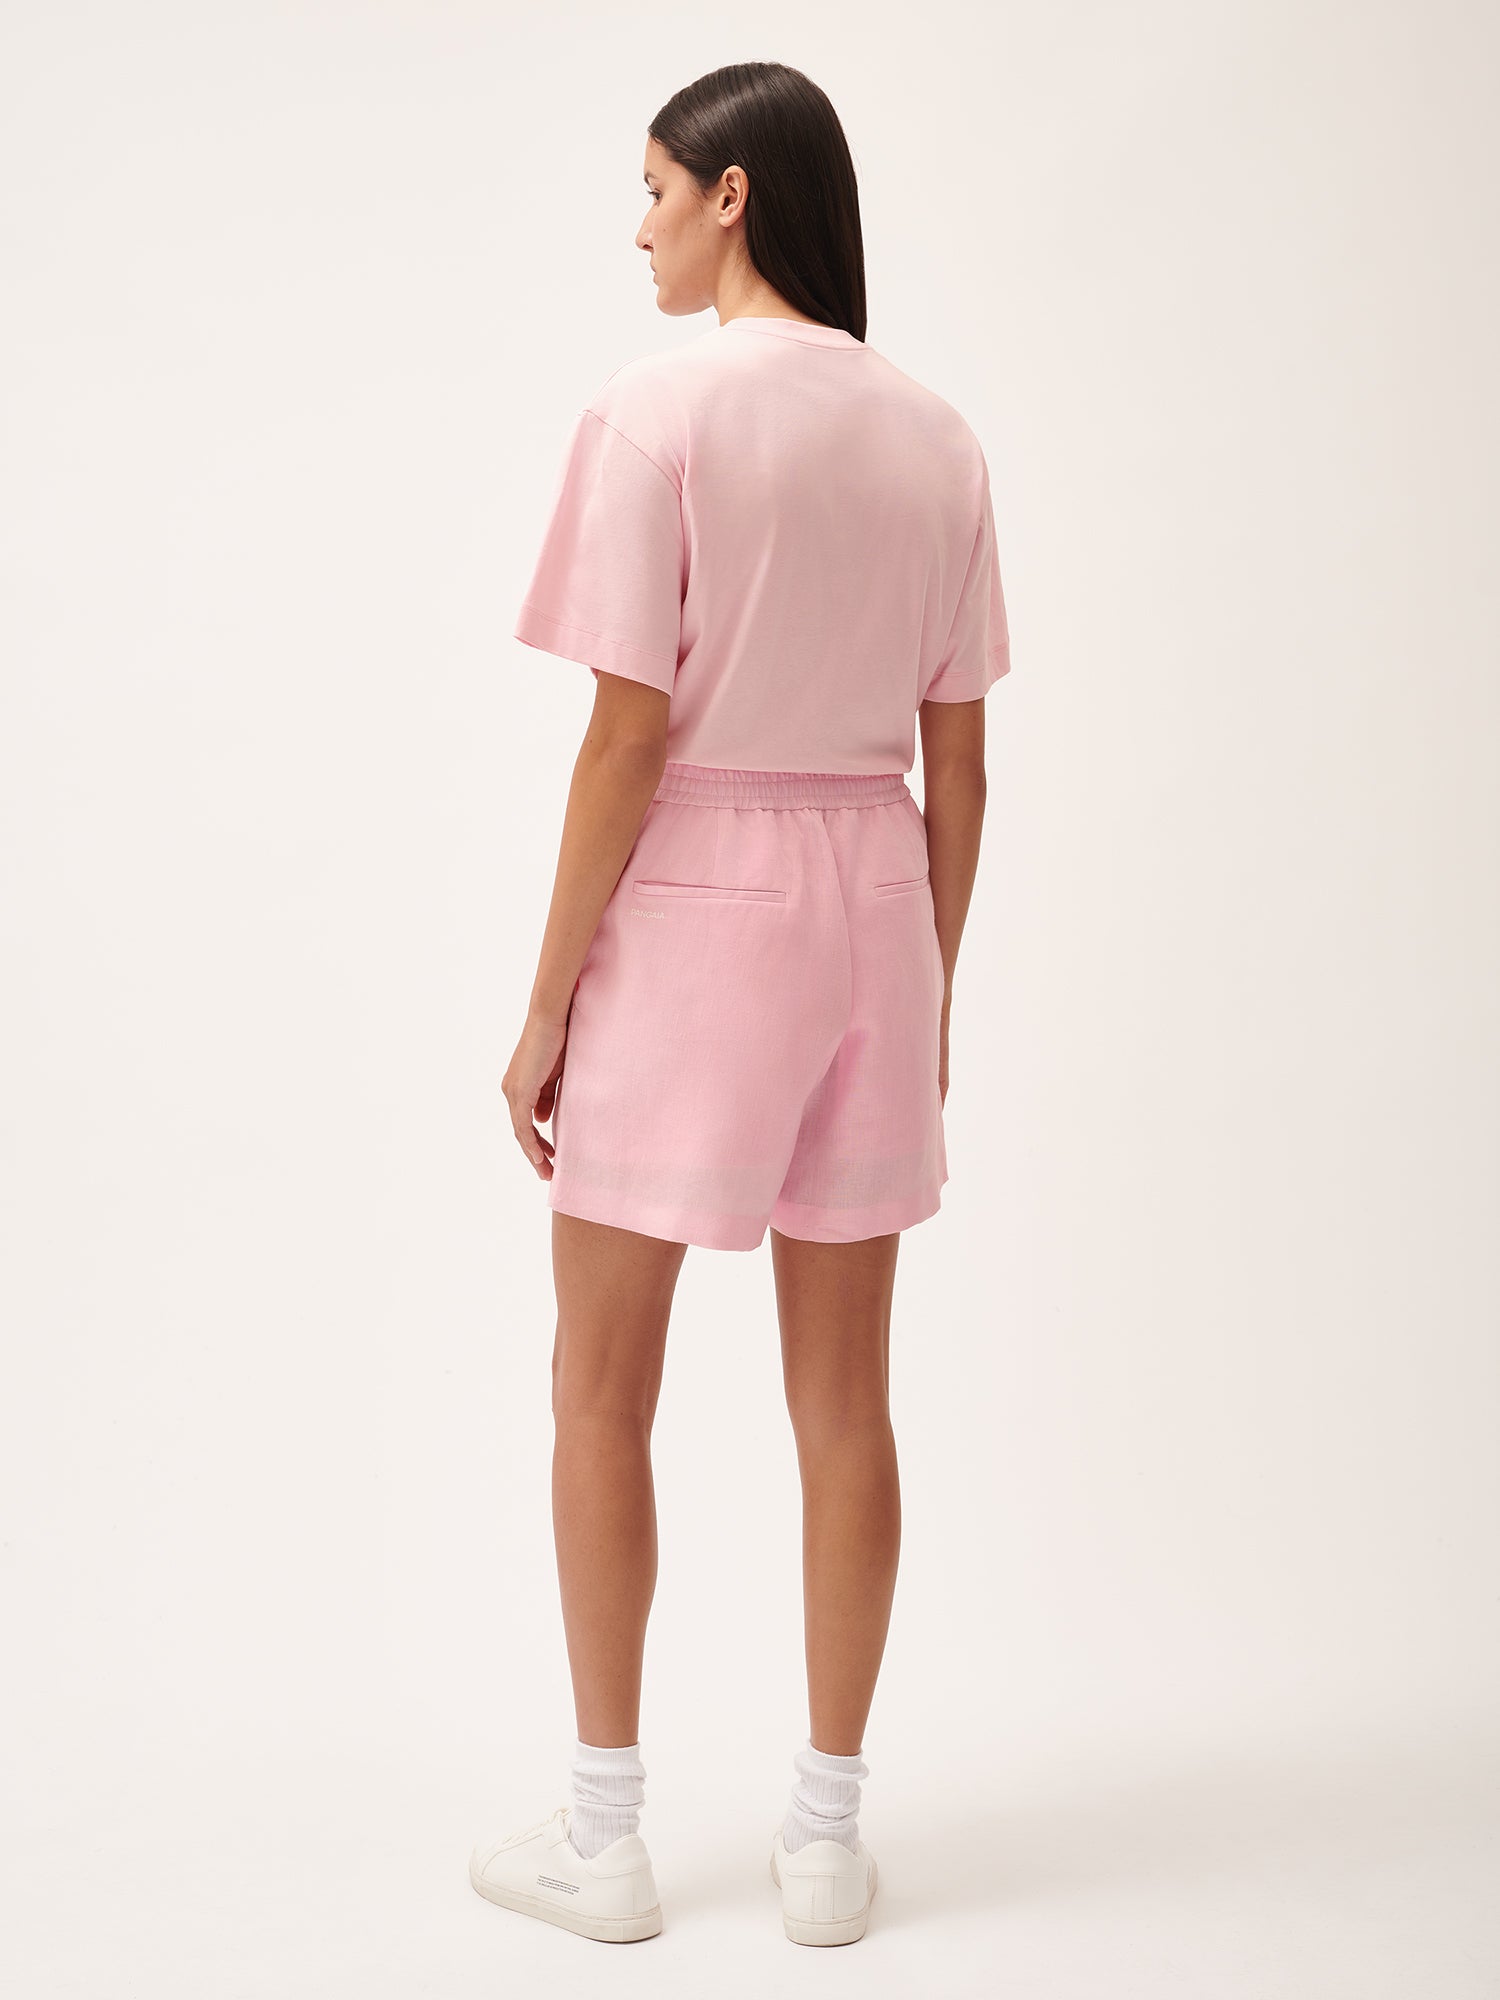 DNA_Linen_Mid_Length_Shorts_MagnoliaPink_female-3